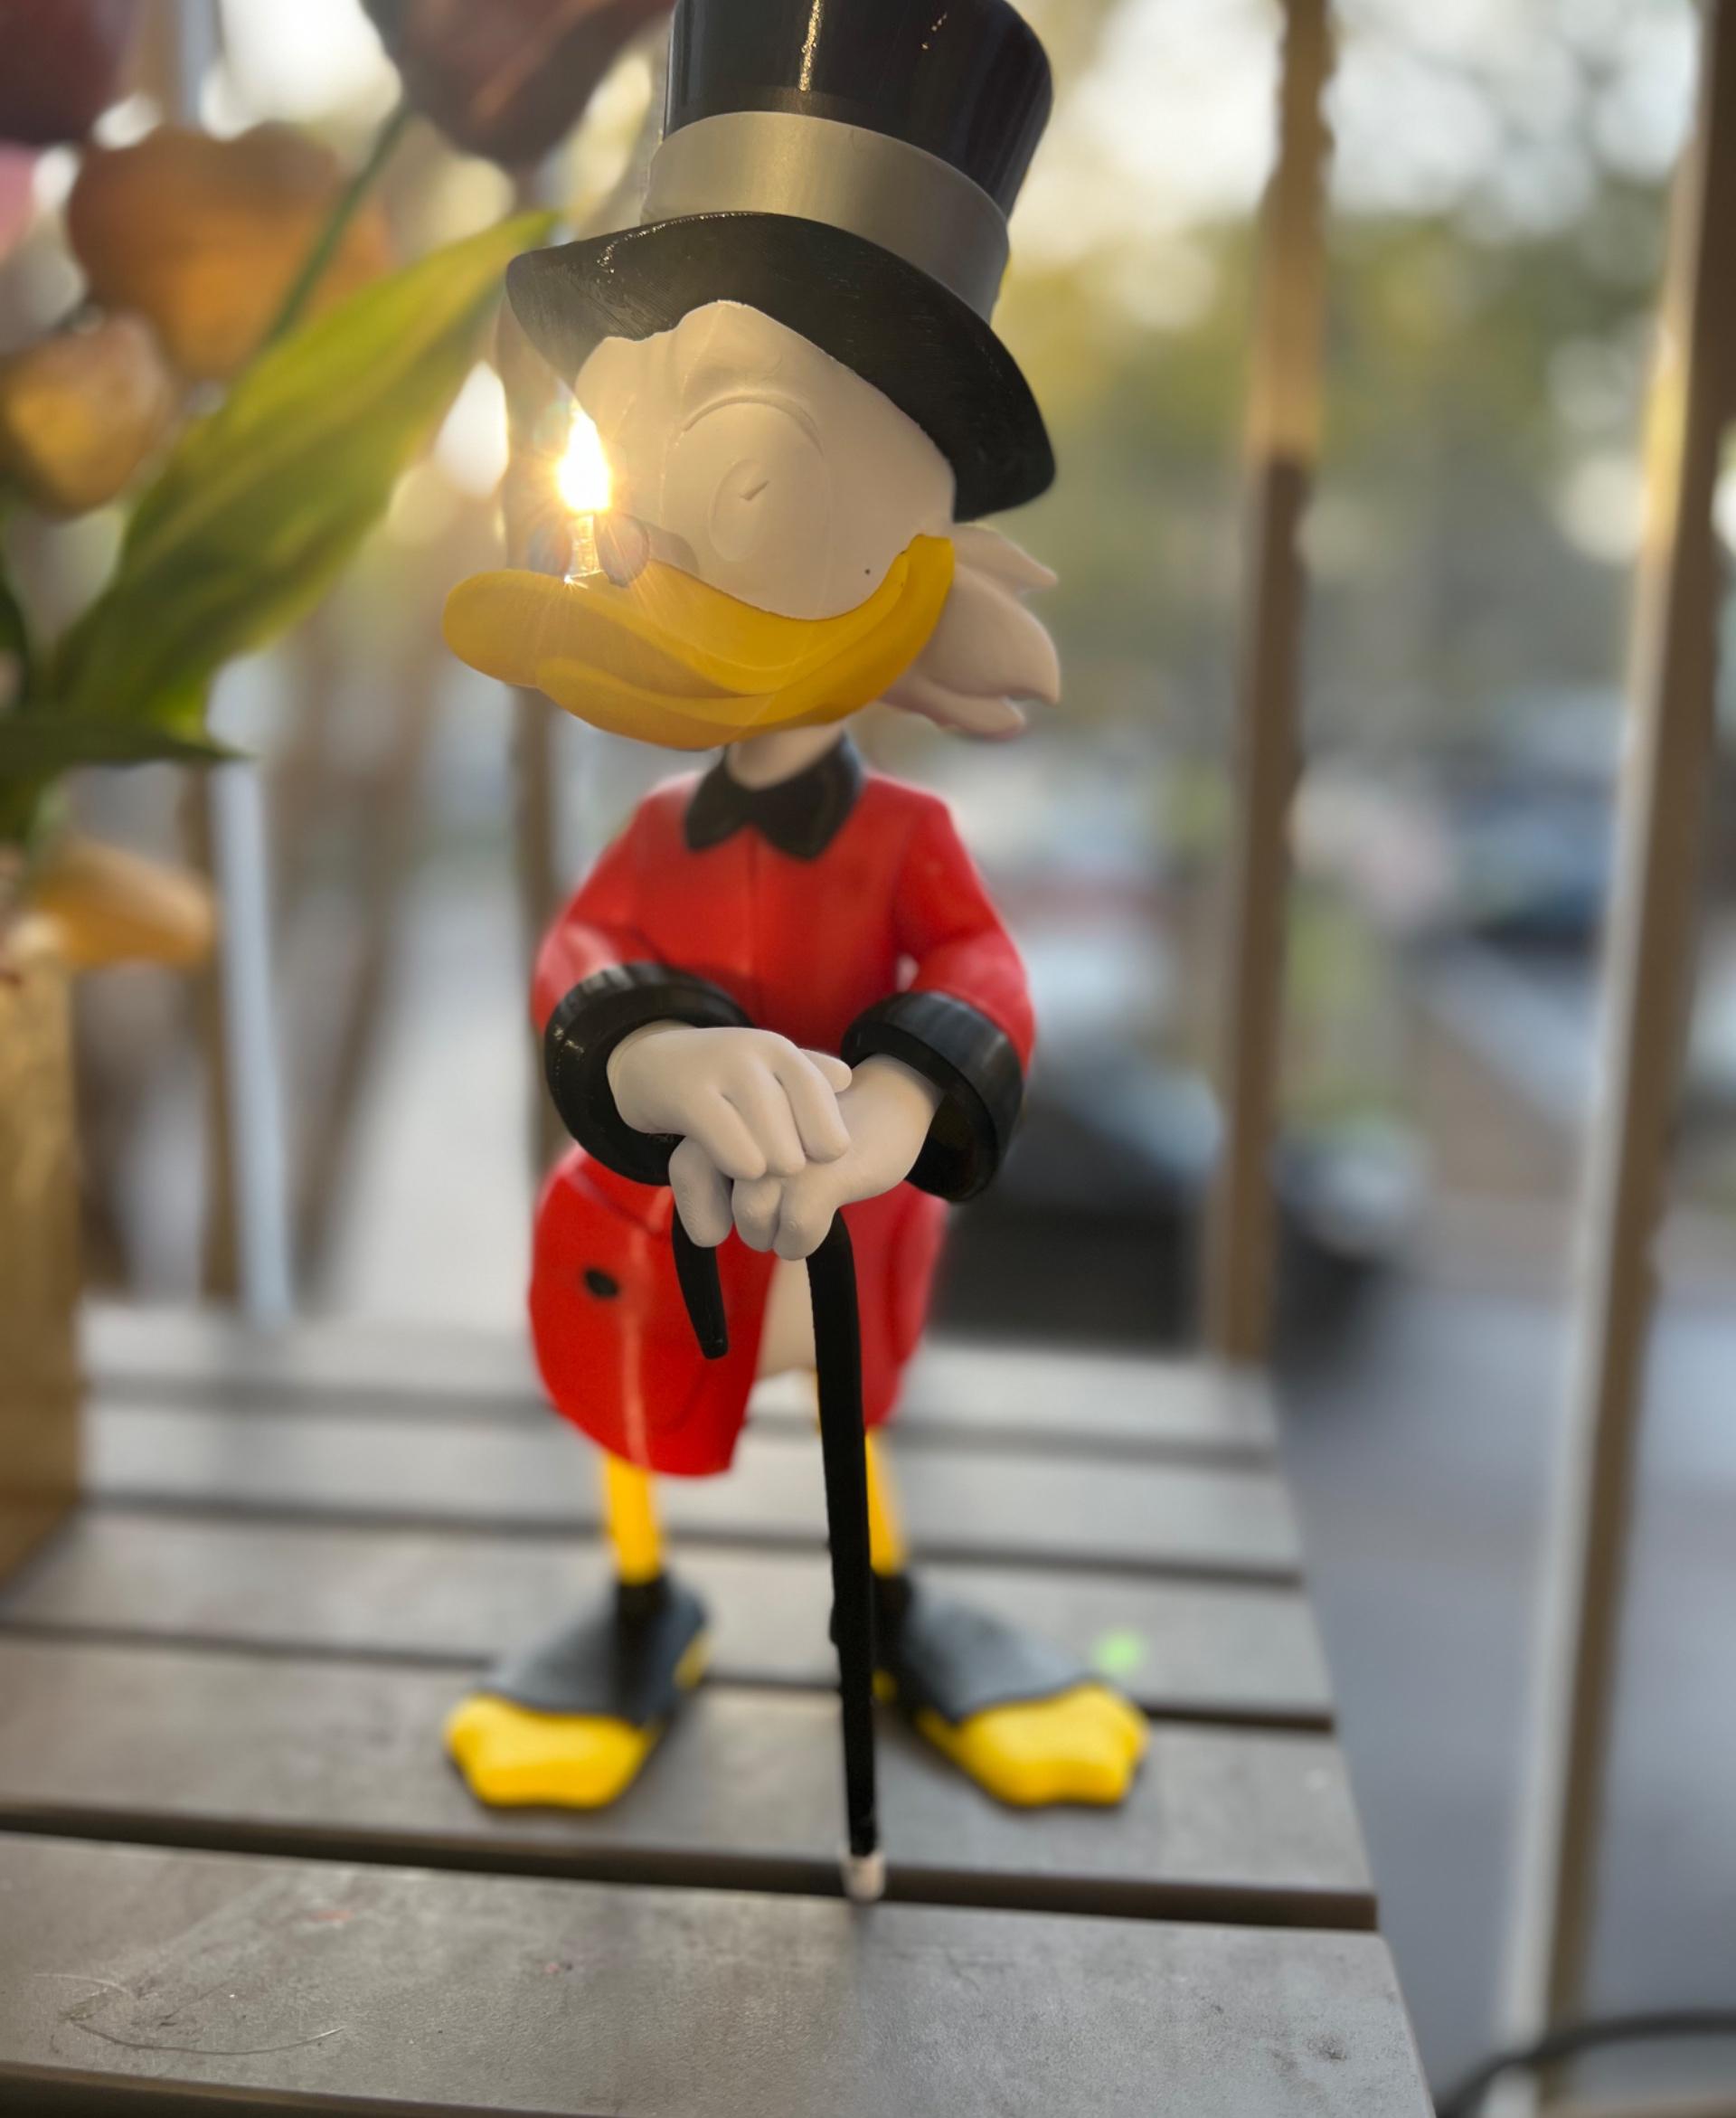 Scrooge Ducktales (2017) - “ I made it by being tougher than the toughies and smarter than the smarties.” - 3d model